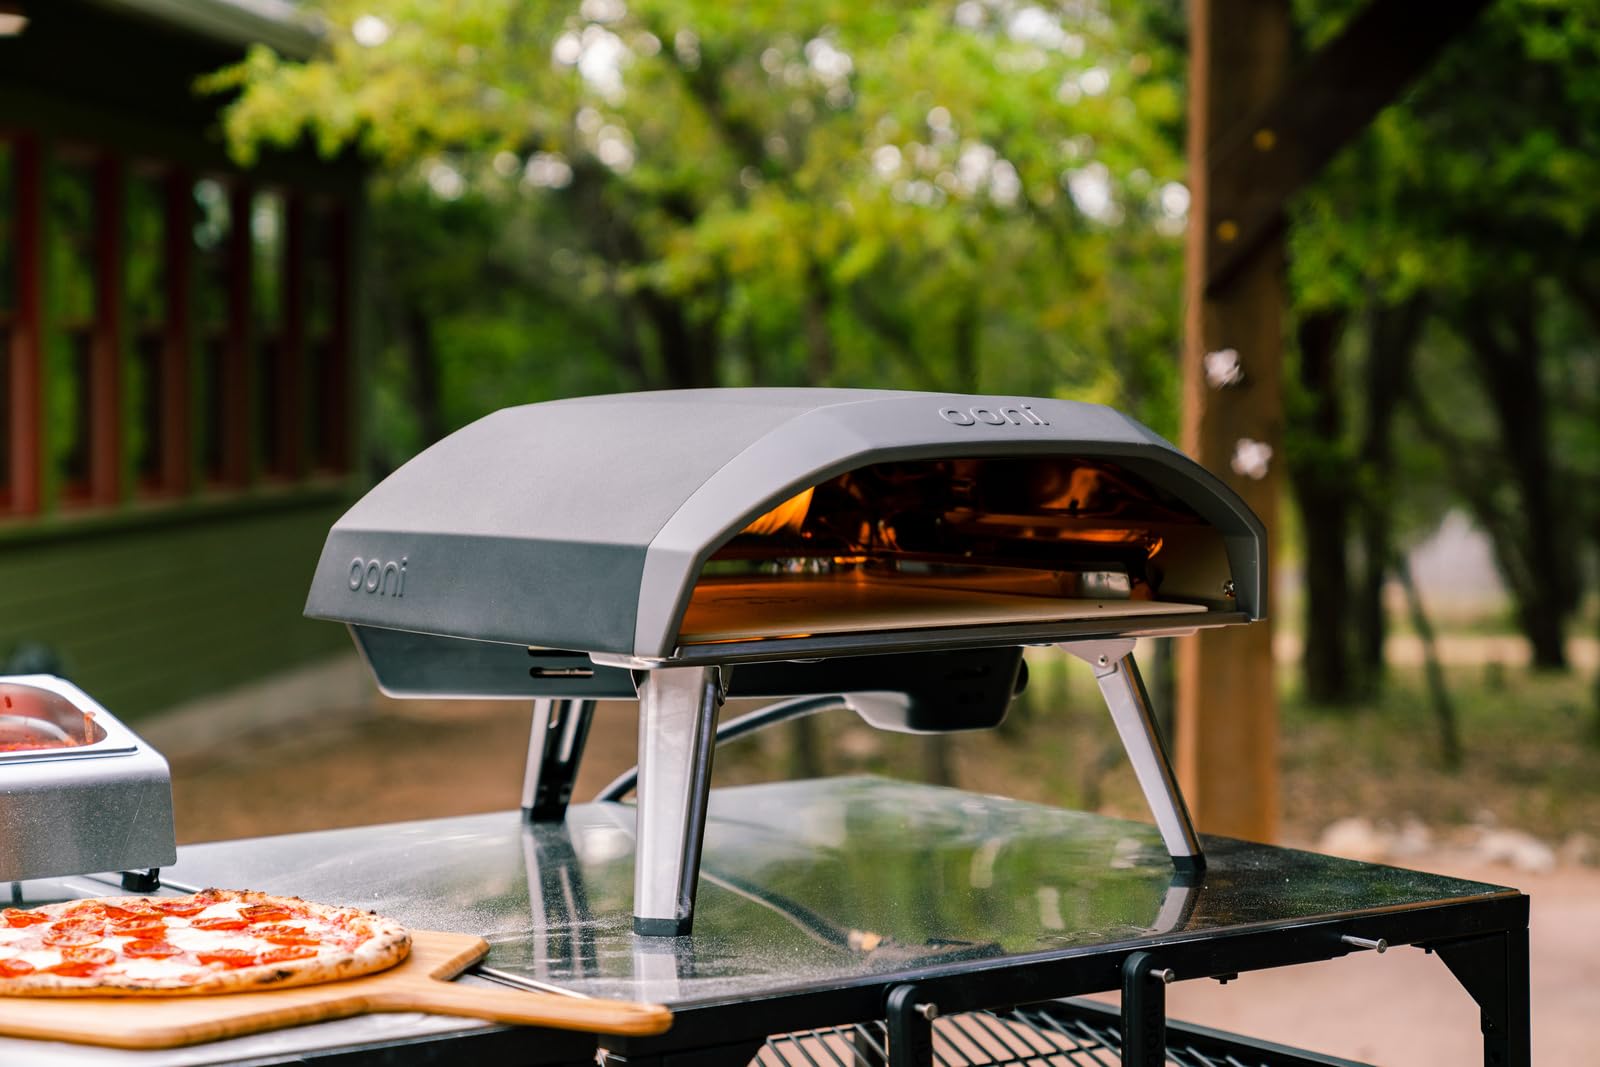 Offer - Save on Ooni Ooni Koda 16 Cover with Ooni Koda 16 Portable Gas Pizza Oven - Outdoor Pizza Oven for Authentic Stone